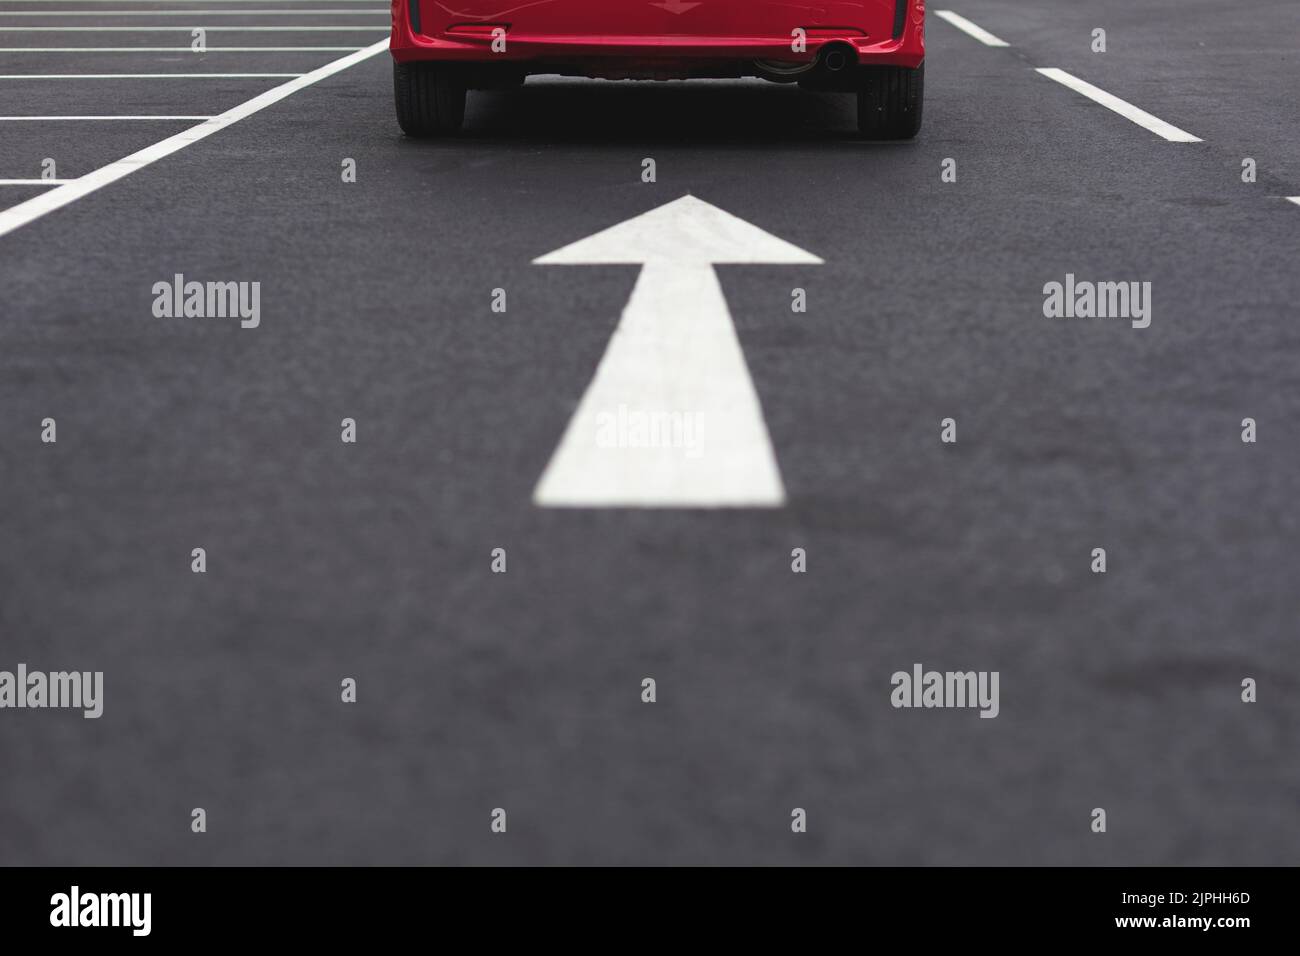 Red car following arrow on ground Stock Photo